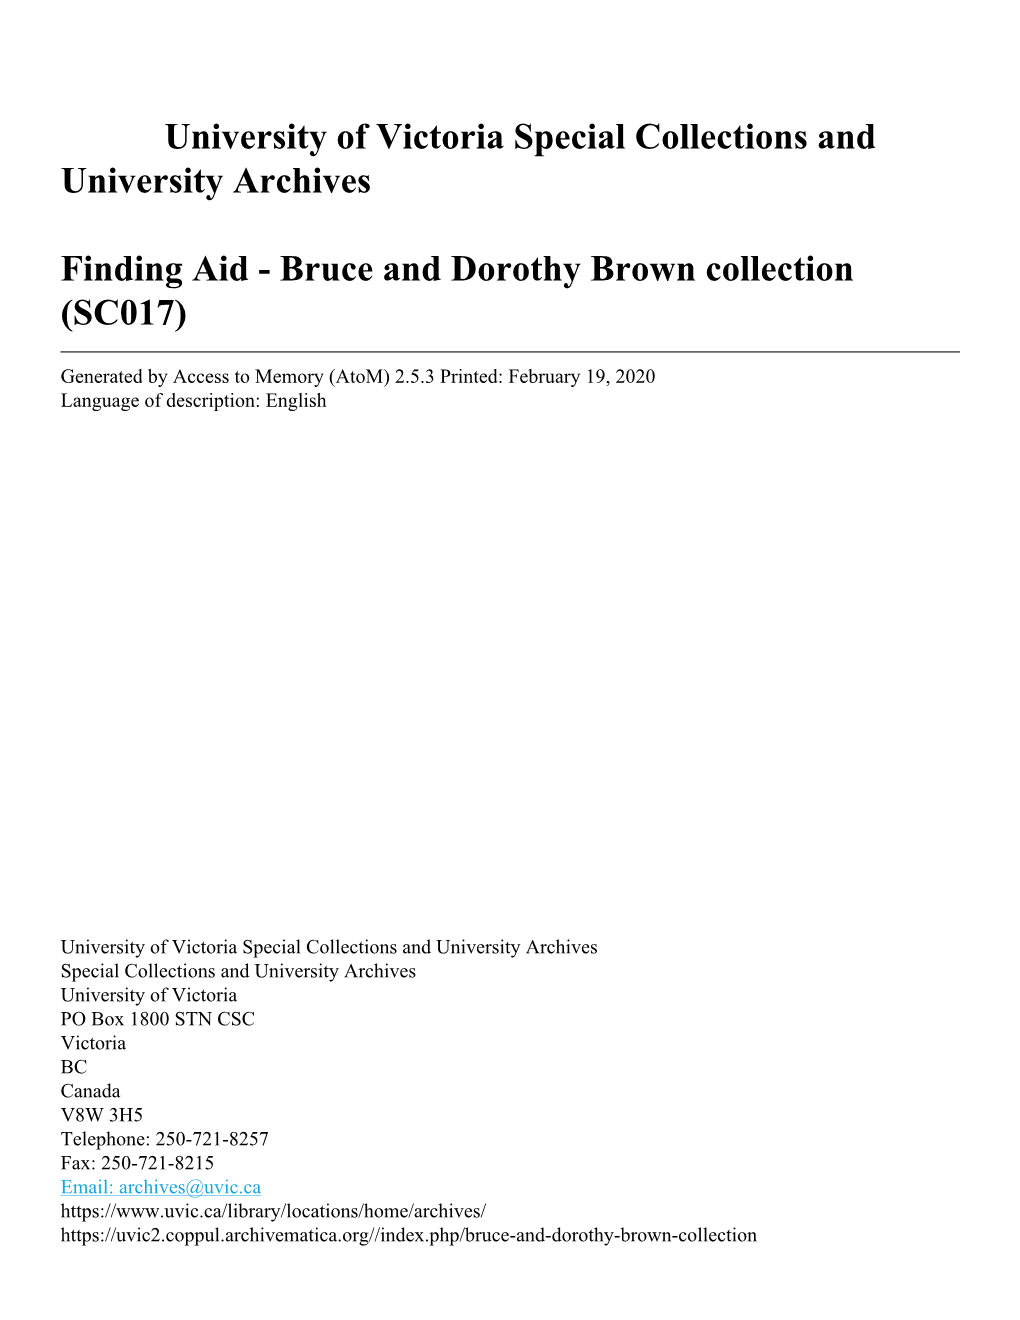 Bruce and Dorothy Brown Collection (SC017)